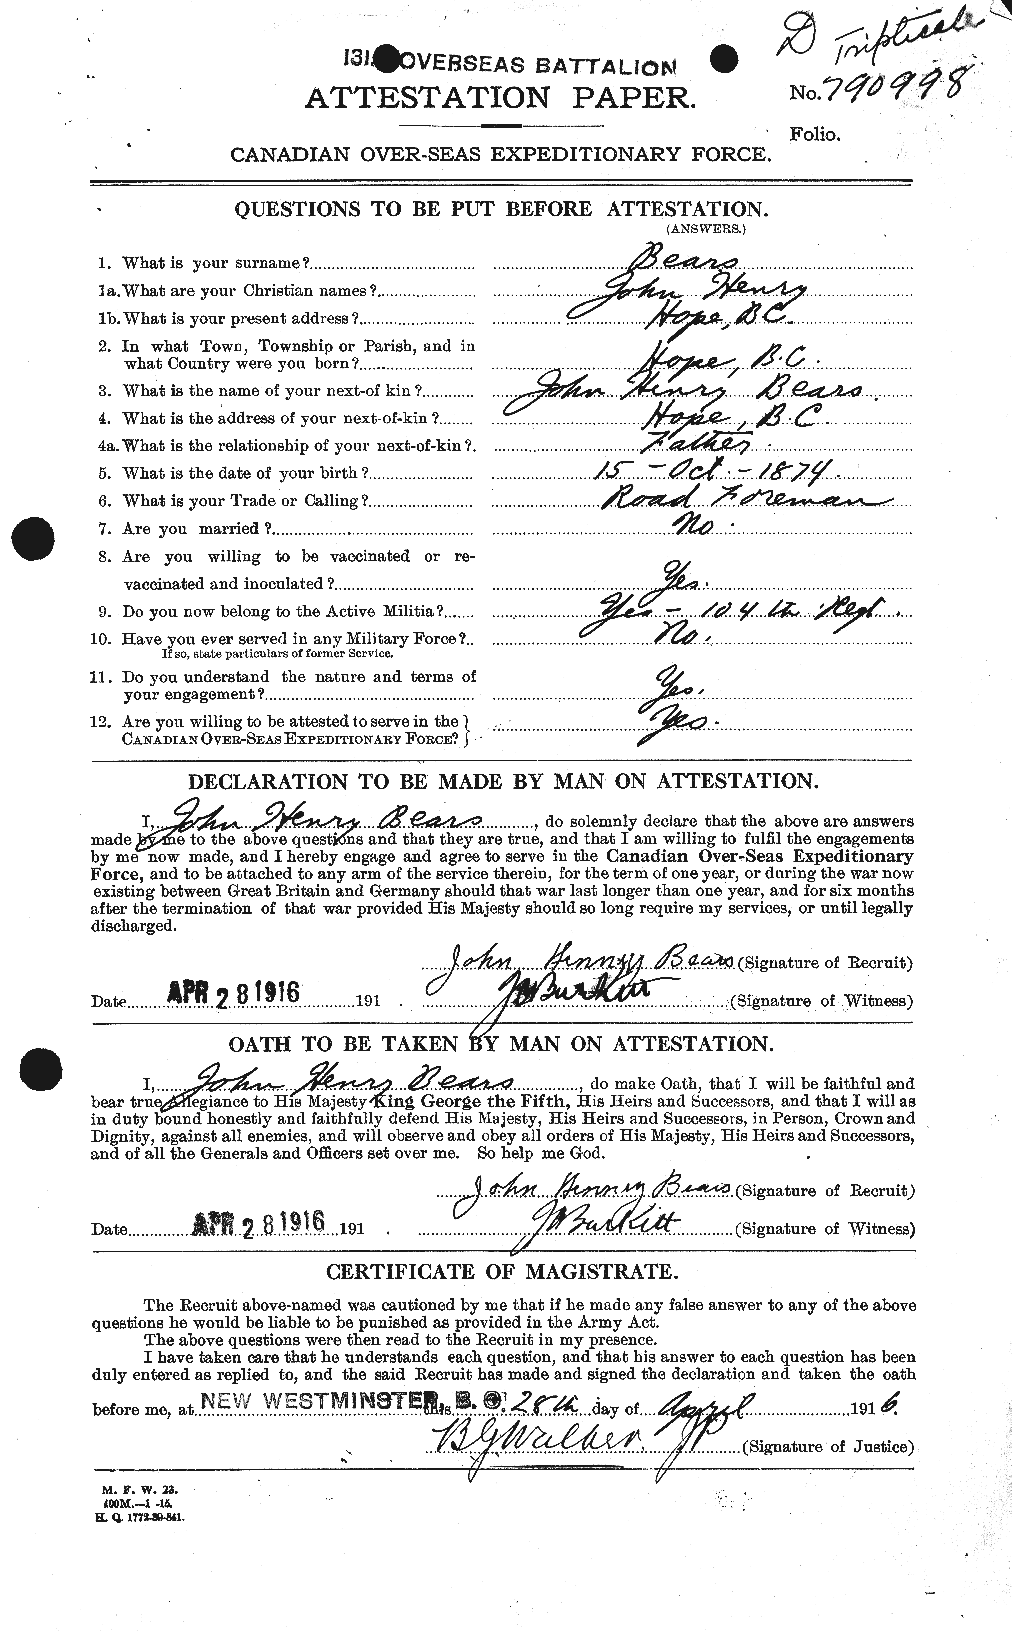 Personnel Records of the First World War - CEF 230388a